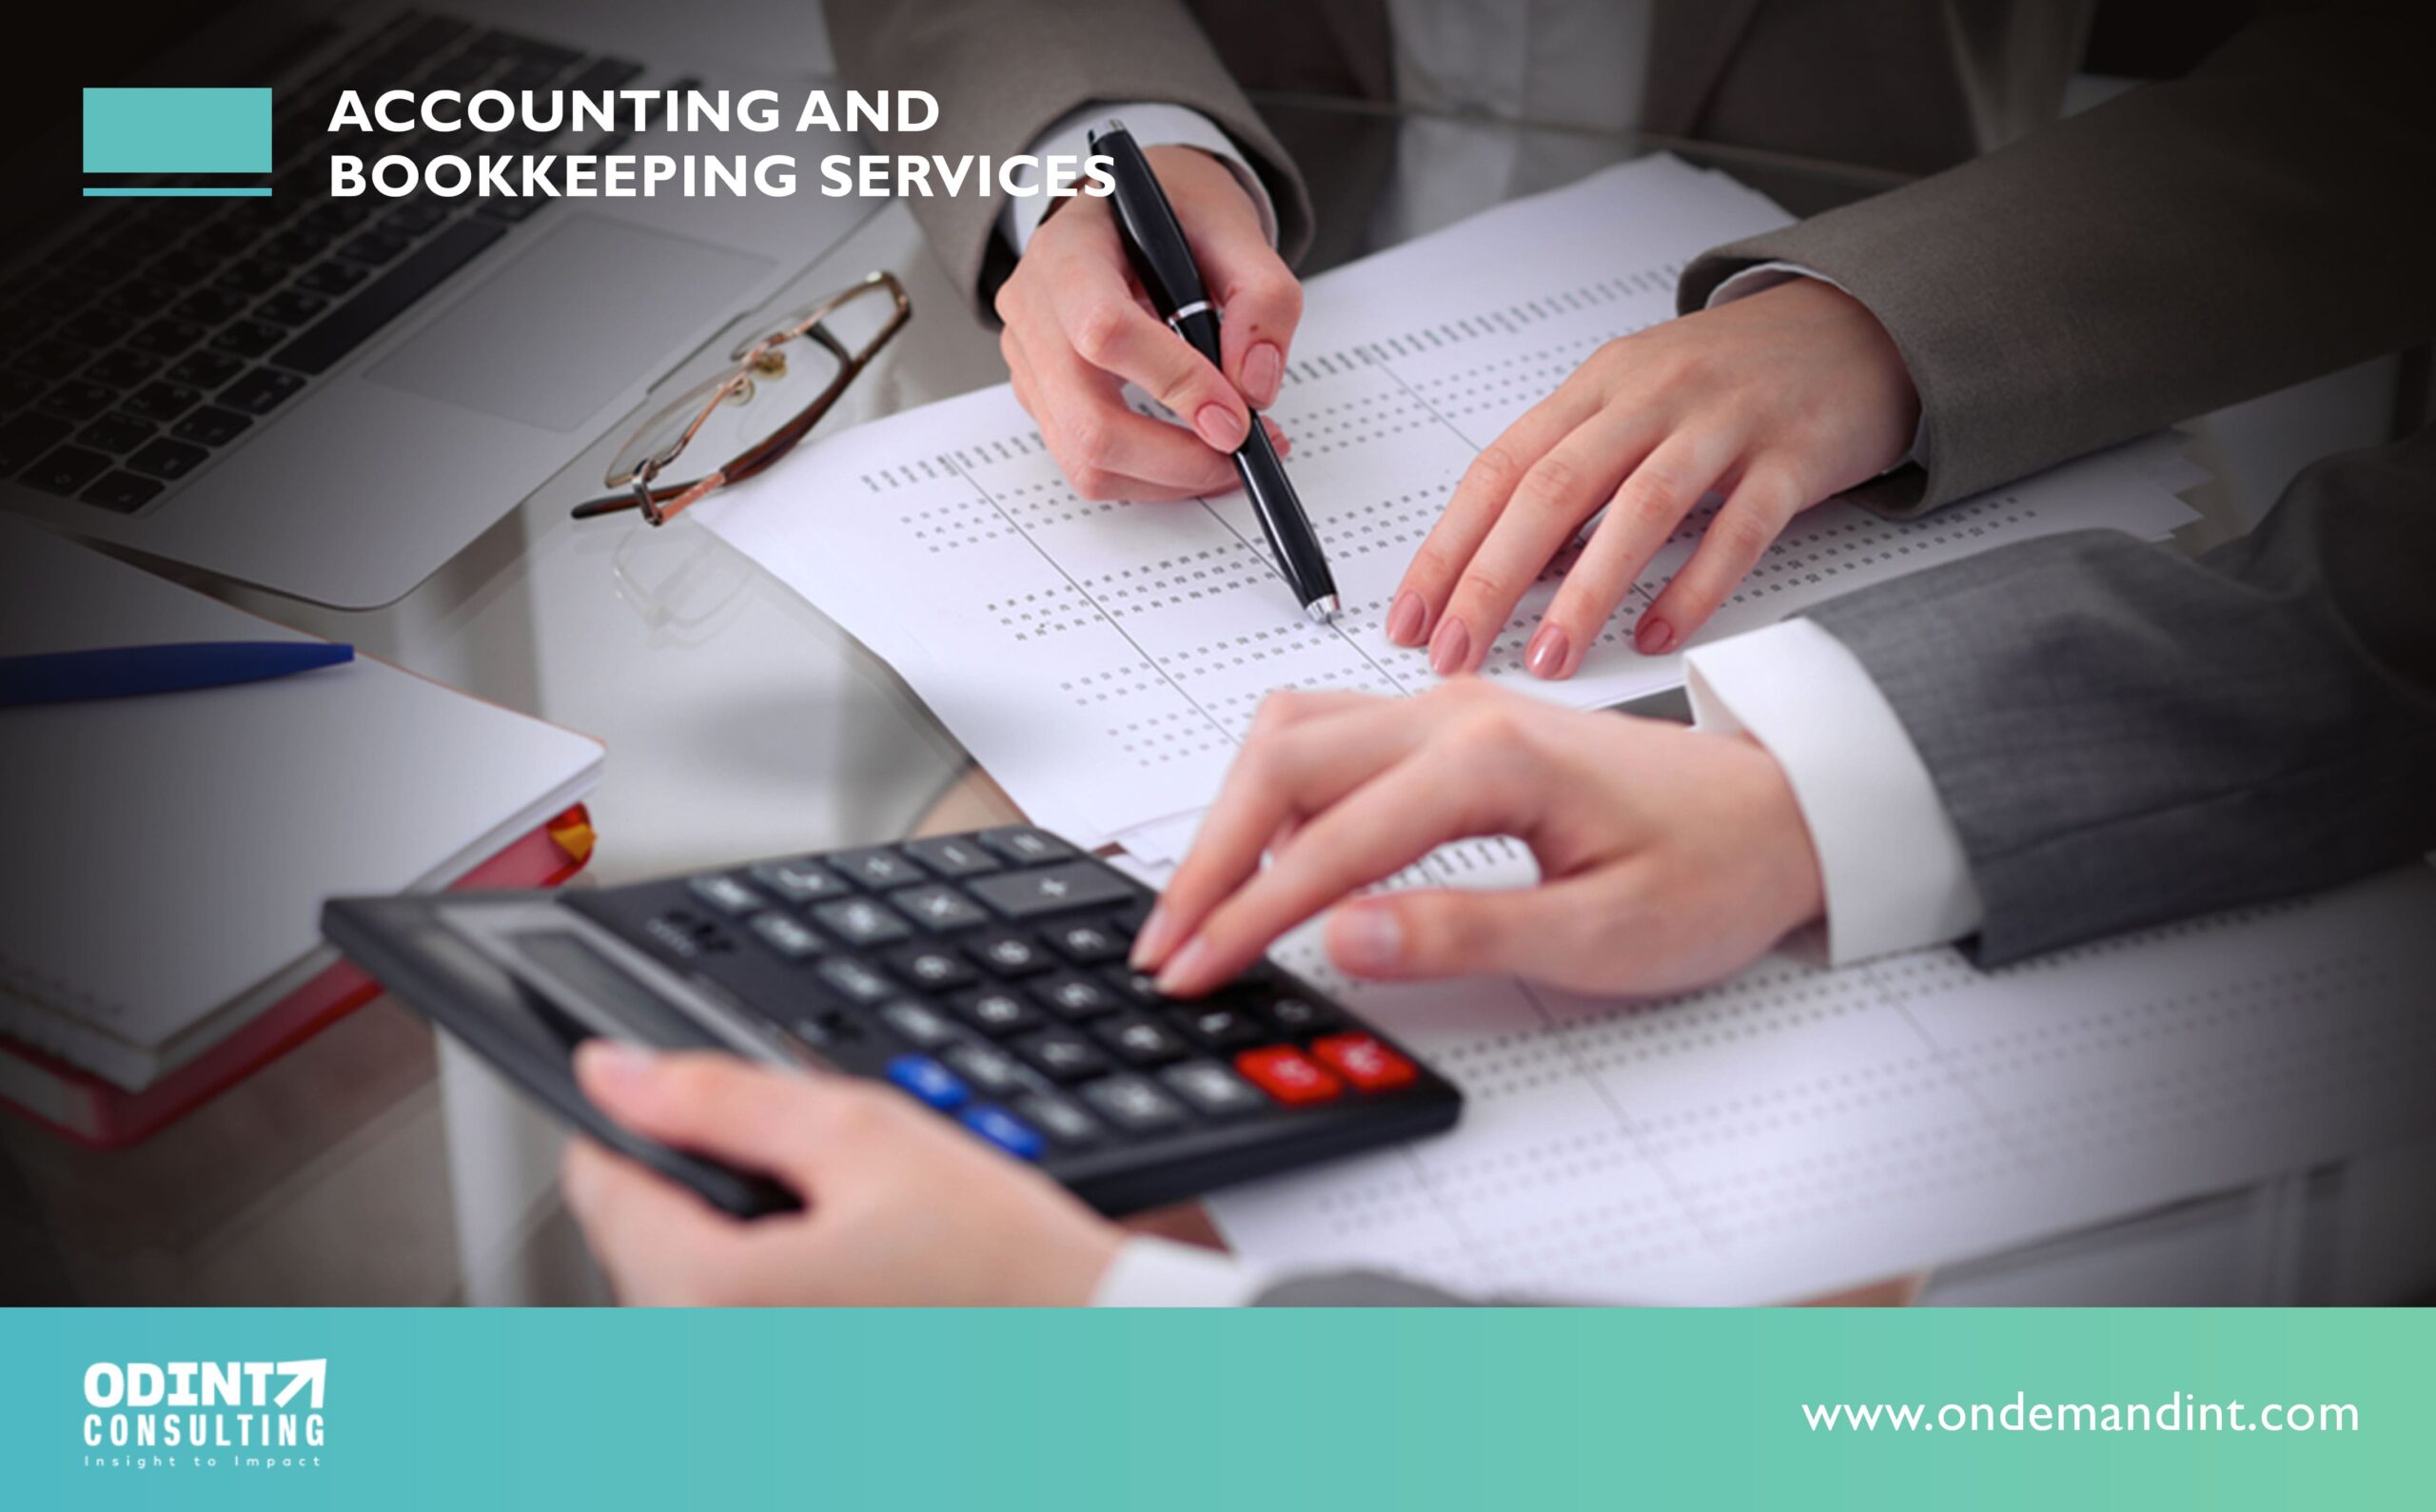 Accounting and Bookkeeping Services: Benefits & Online Services